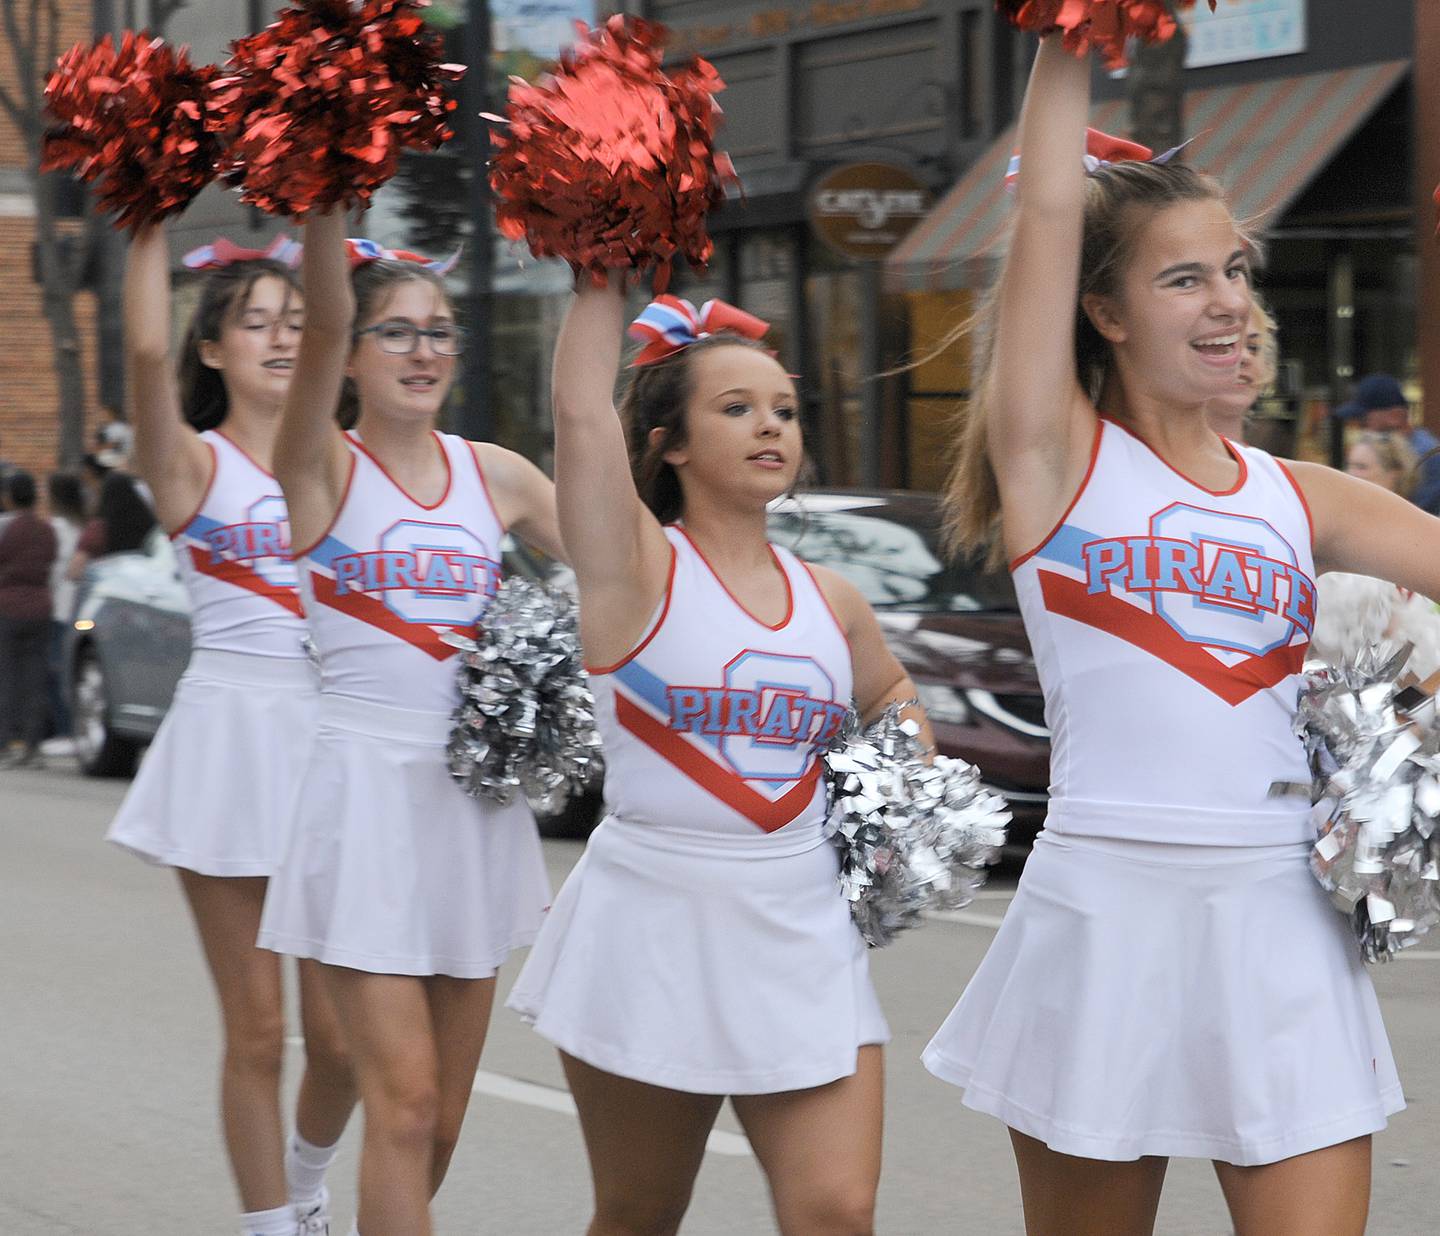 Cheerleaders for Ottawa High School cheer as they march Wednesday, Sept. 21, 2022, along LaSalle Street in Ottawa during the school’s homecoming parade.